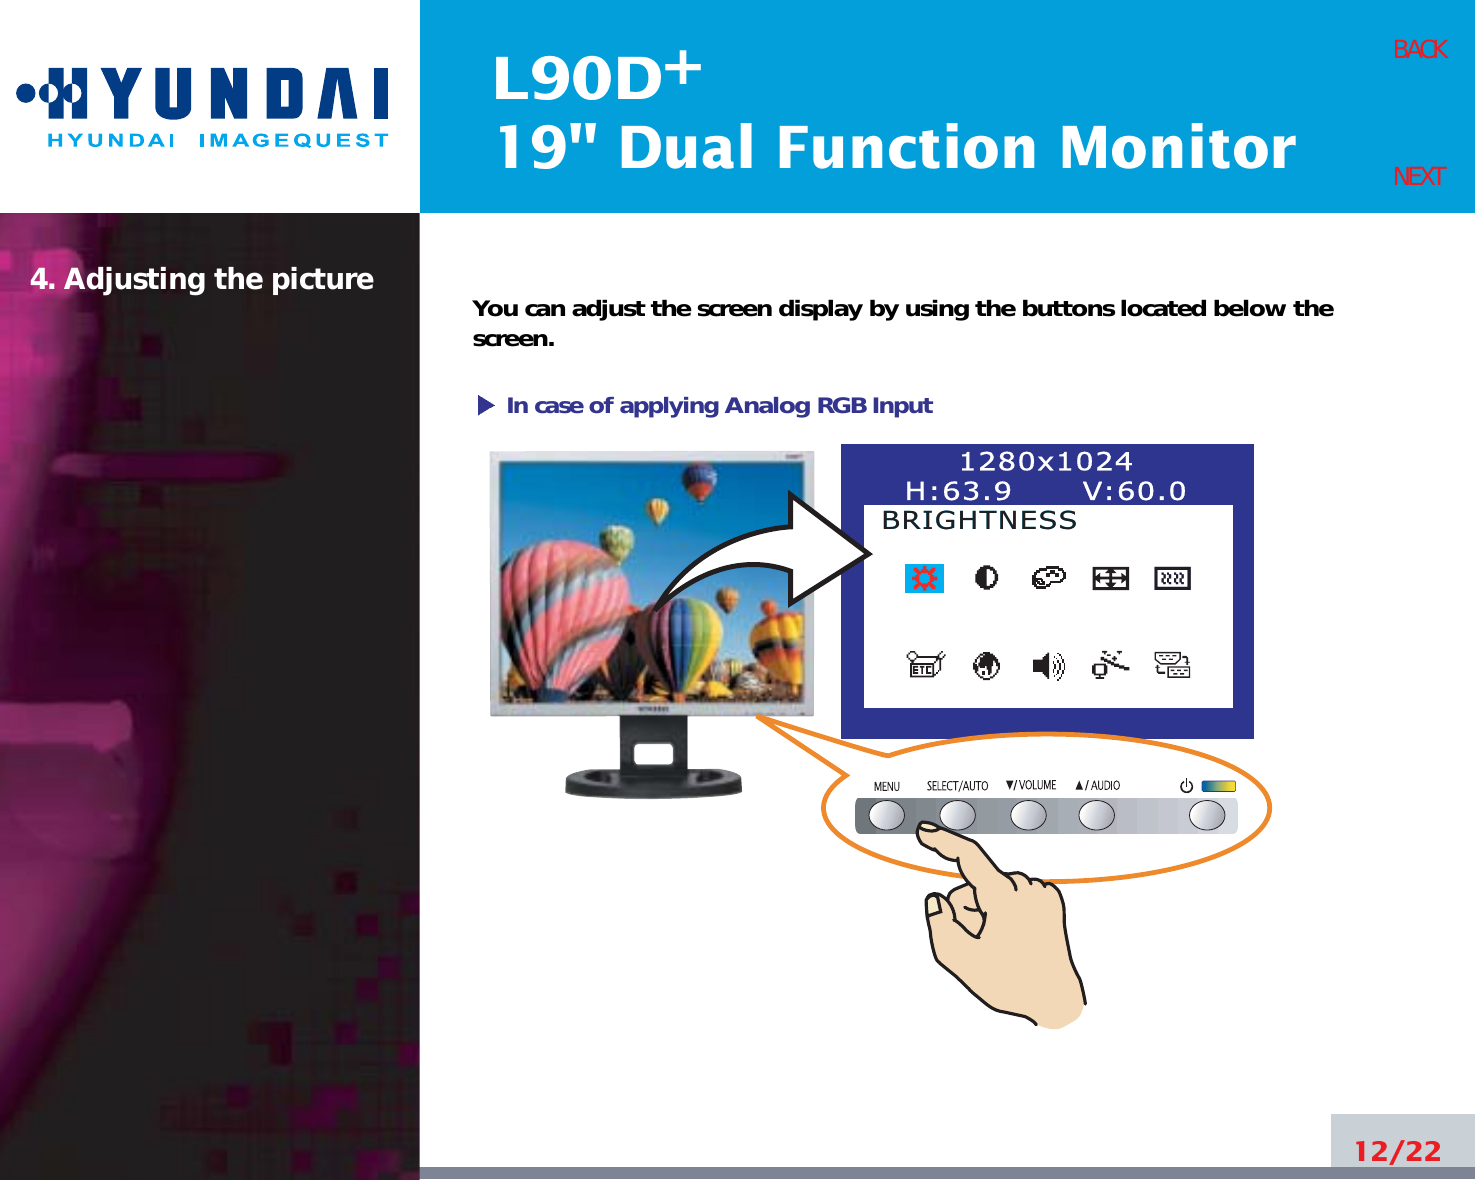 L90D19&quot; Dual Function Monitor+4. Adjusting the picture12/22BACKNEXTYou can adjust the screen display by using the buttons located below thescreen.1280x1024H:63.9      V:60.0BRIGHTNESSBRIGHTNESSIn case of applying Analog RGBInput